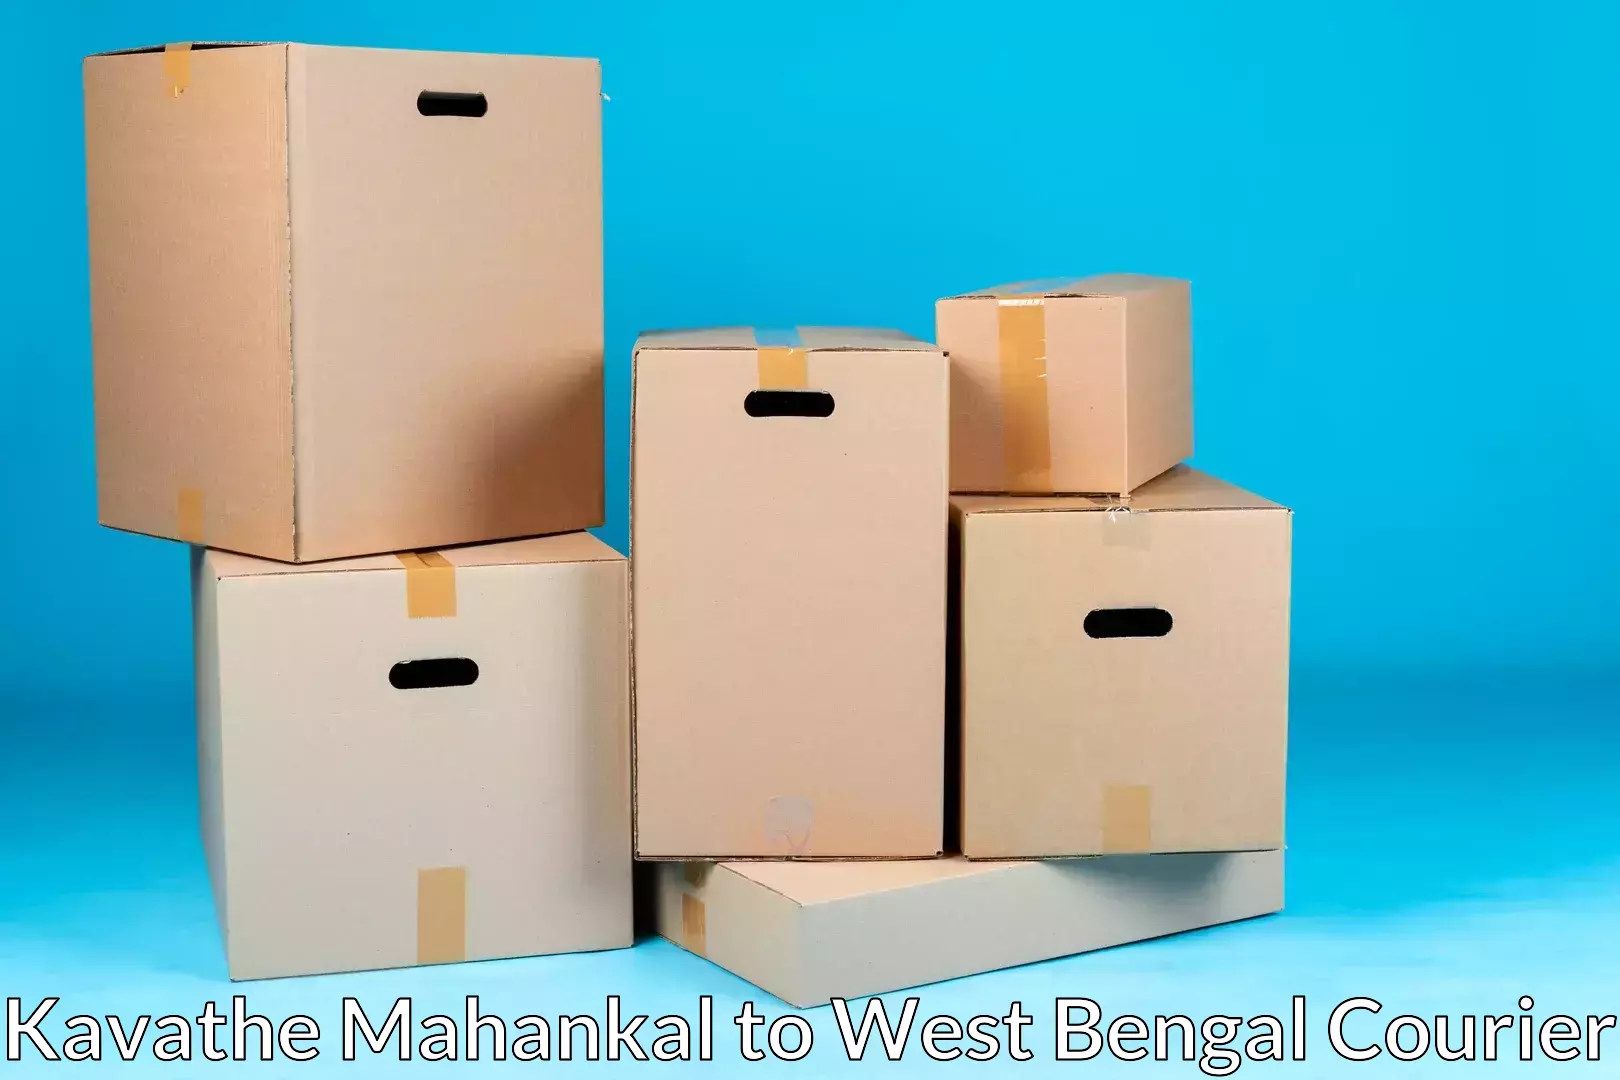 Hassle-free relocation Kavathe Mahankal to Durgapur